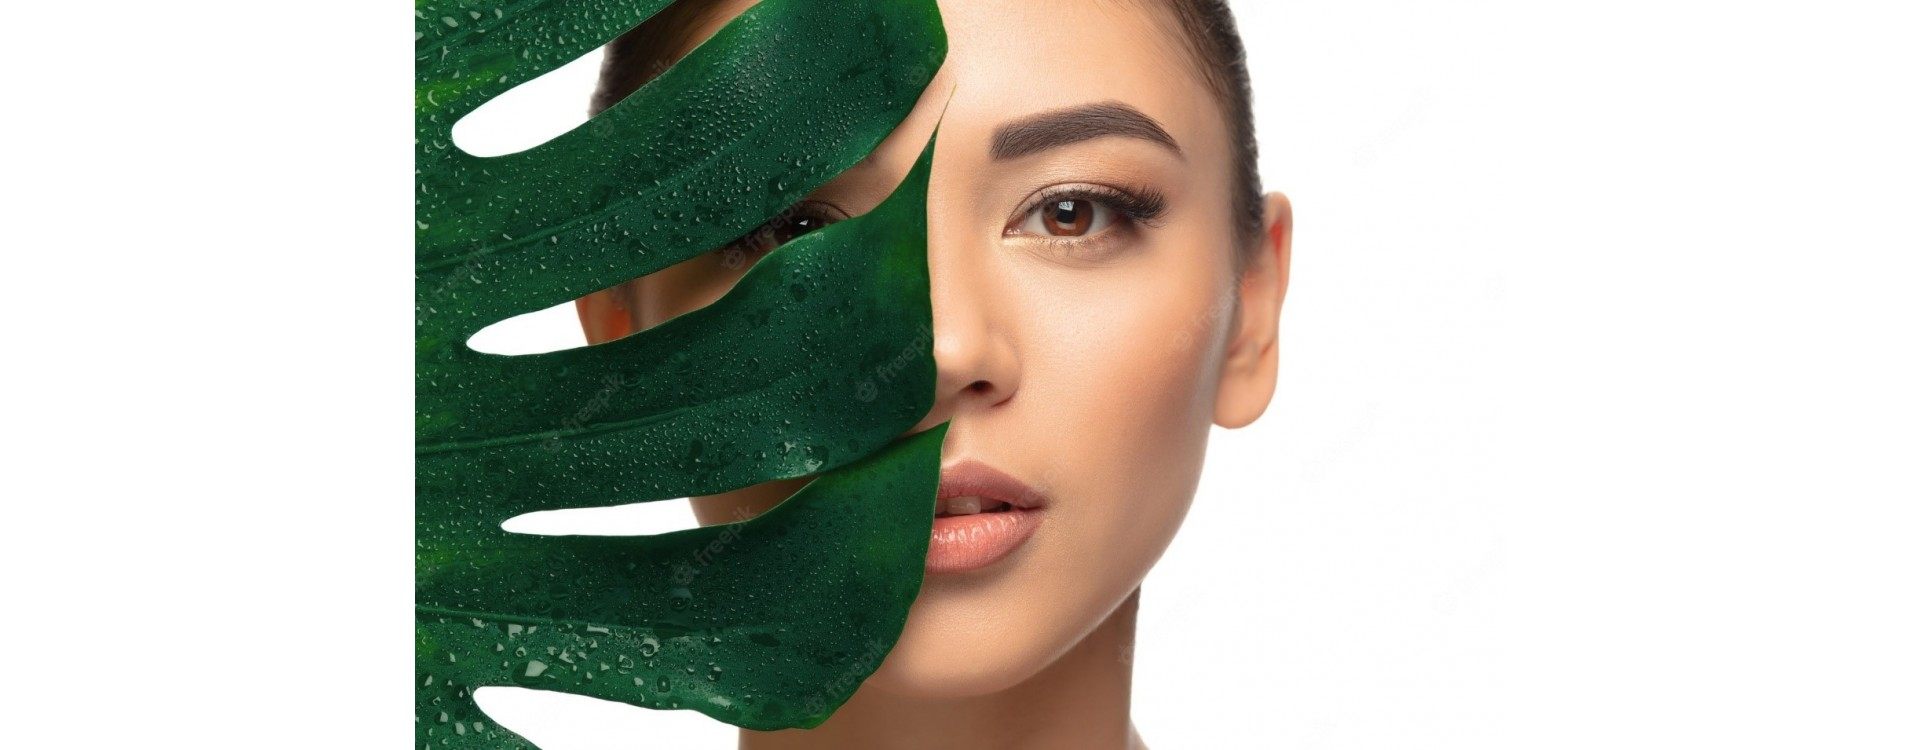 to Glowing natural of the organic with products: skin benefits guide beauty